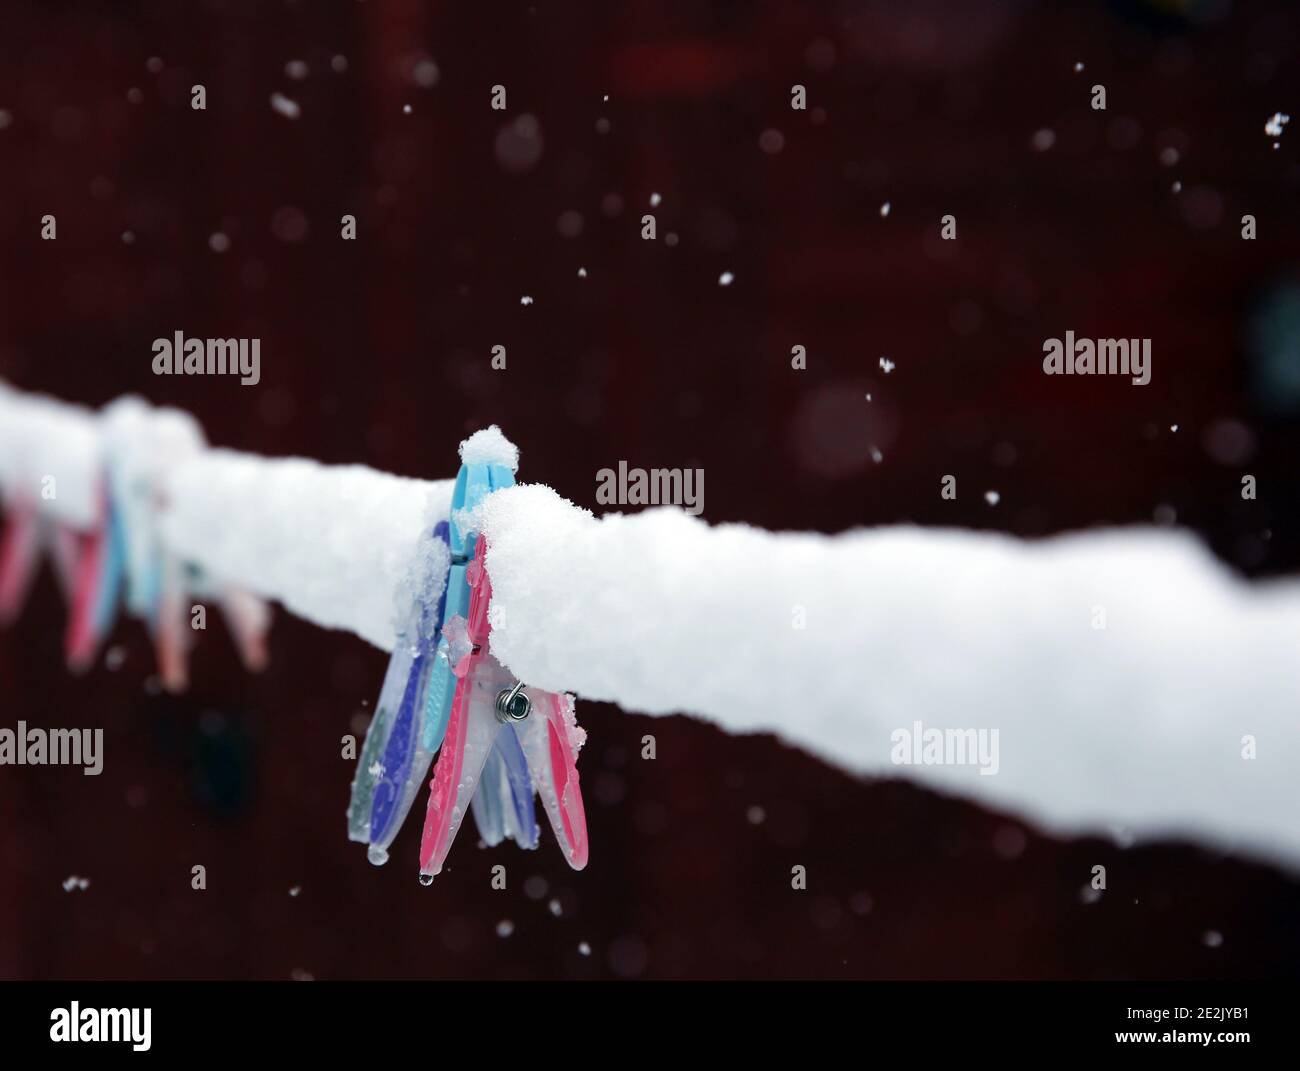 Clothes pegs on a frozen washing line covered in snow. Stock Photo